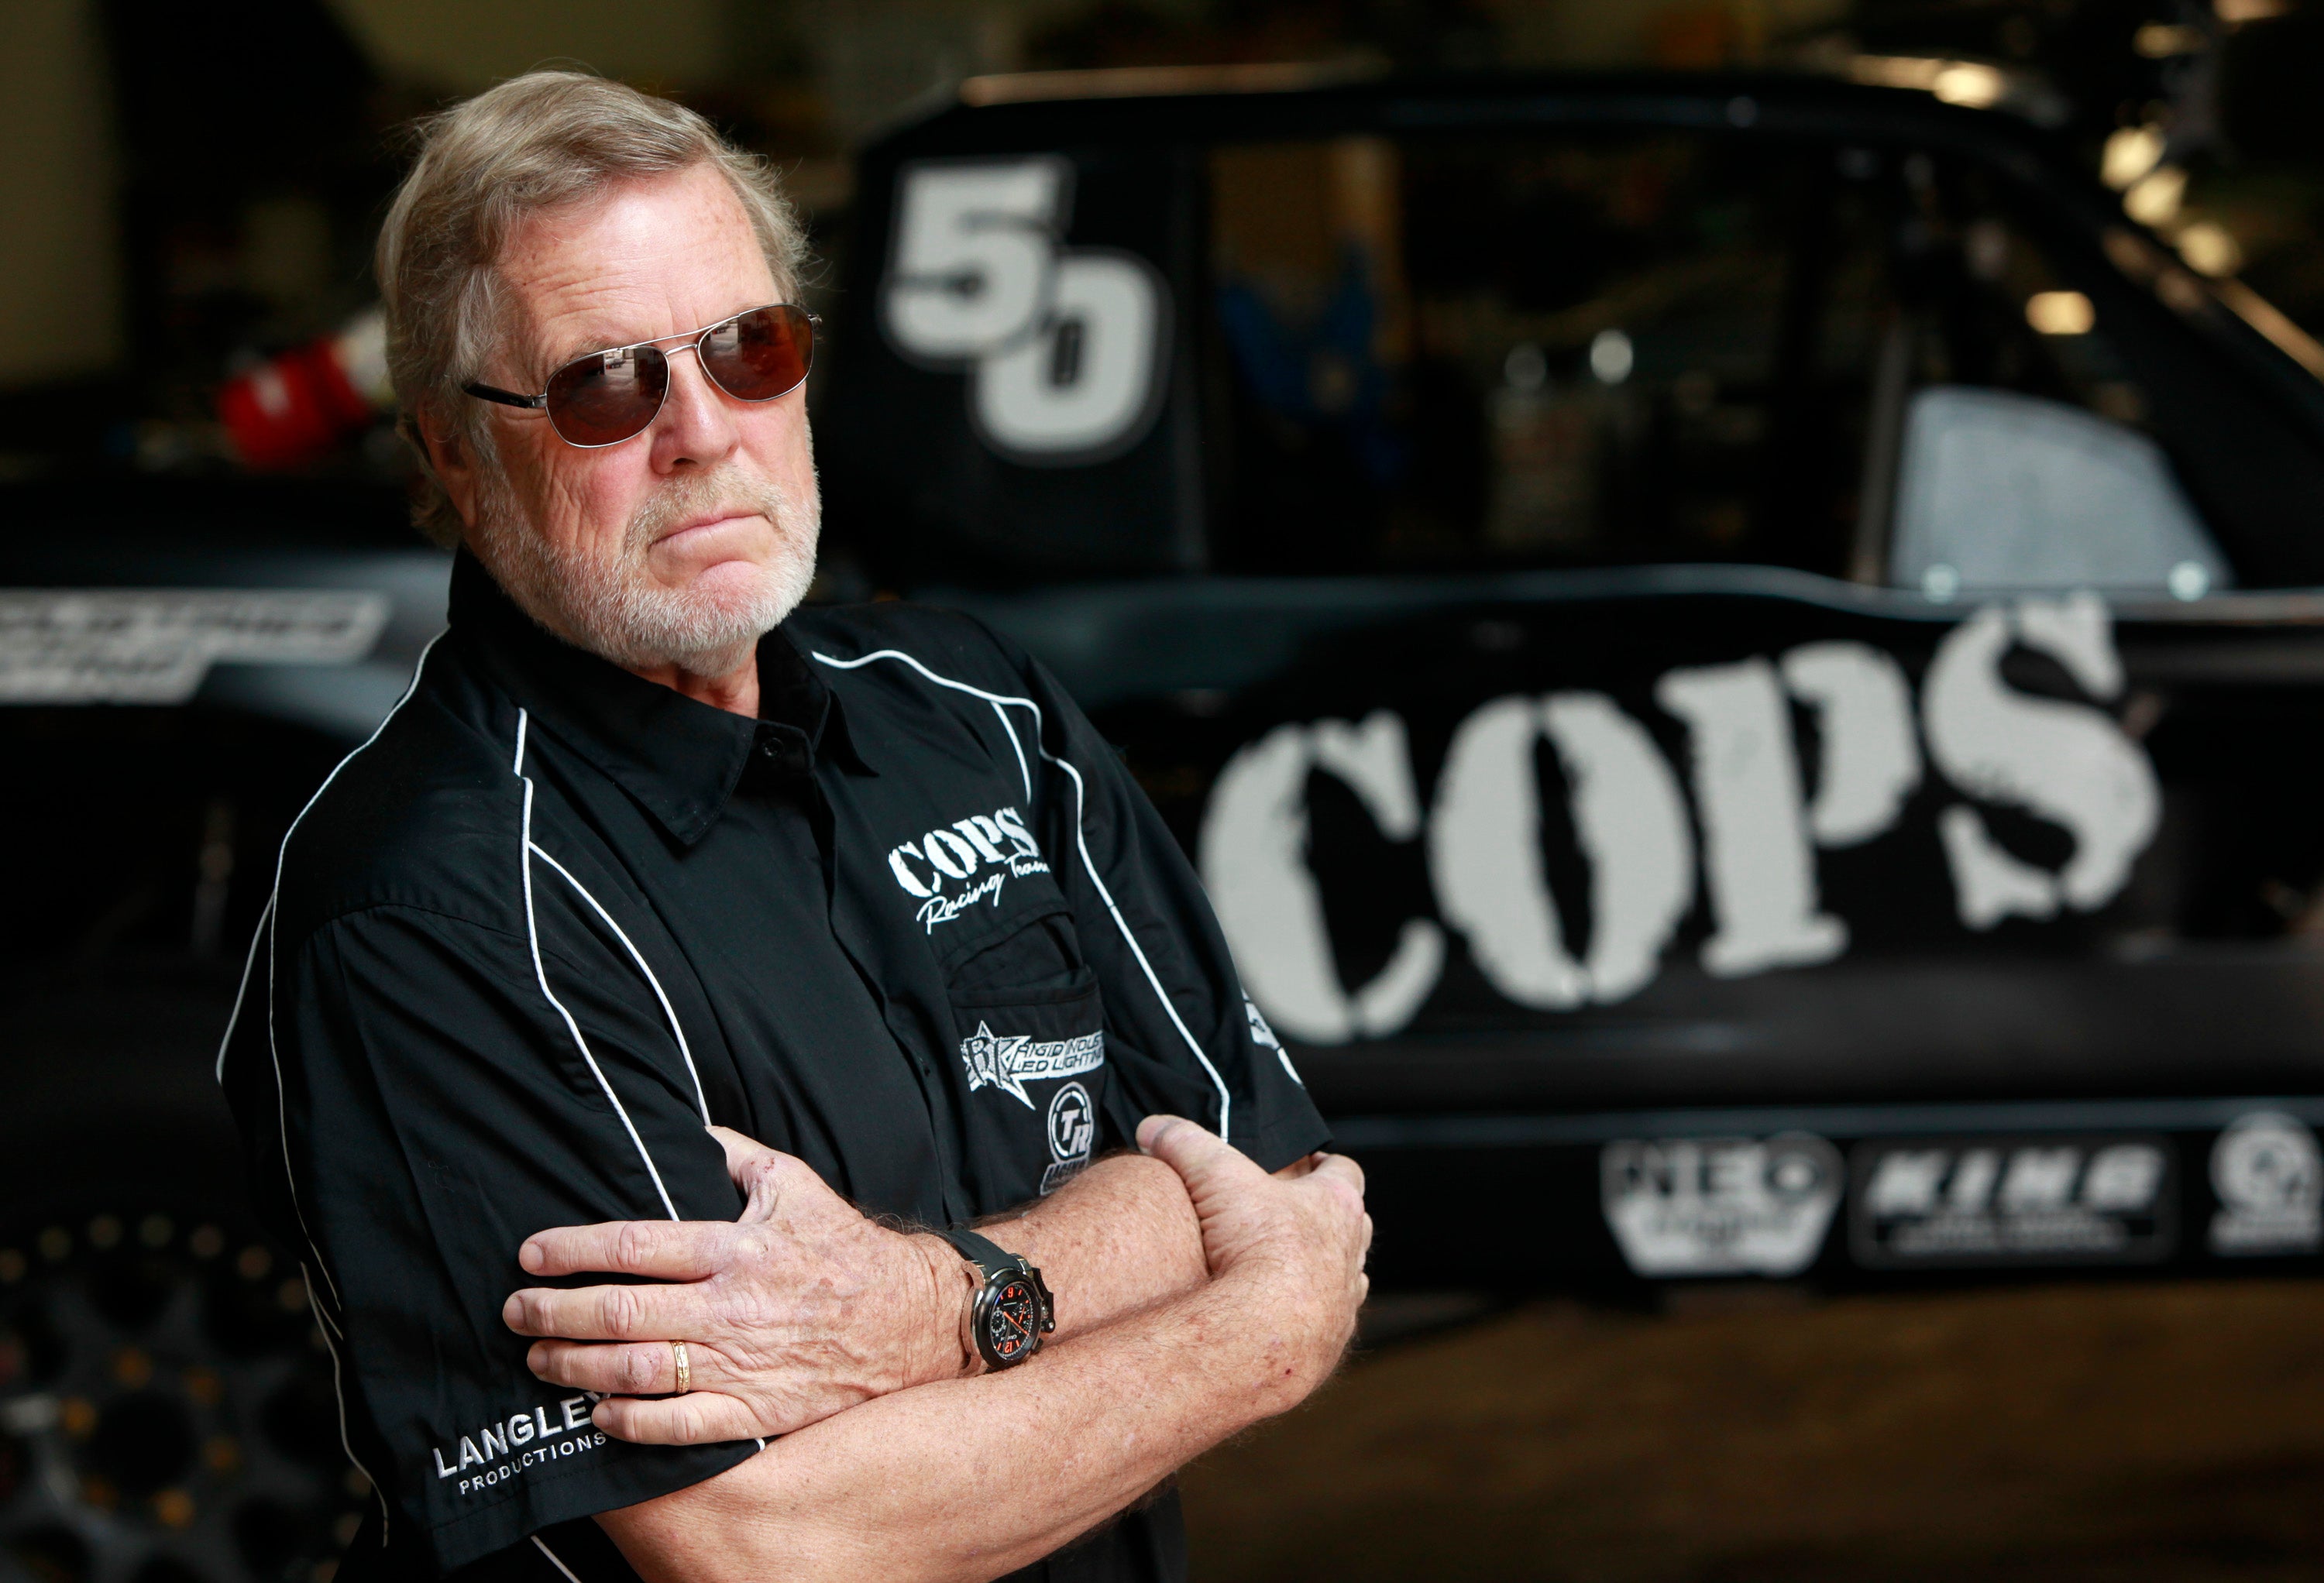 SCORE International CEO Saul Fish (not pictured) gives Cops Racing Team owner (and former Baja 1000 winner) John Langley a preview of the watch at Cops Racing on 1 November, 2012 in El Segundo, California